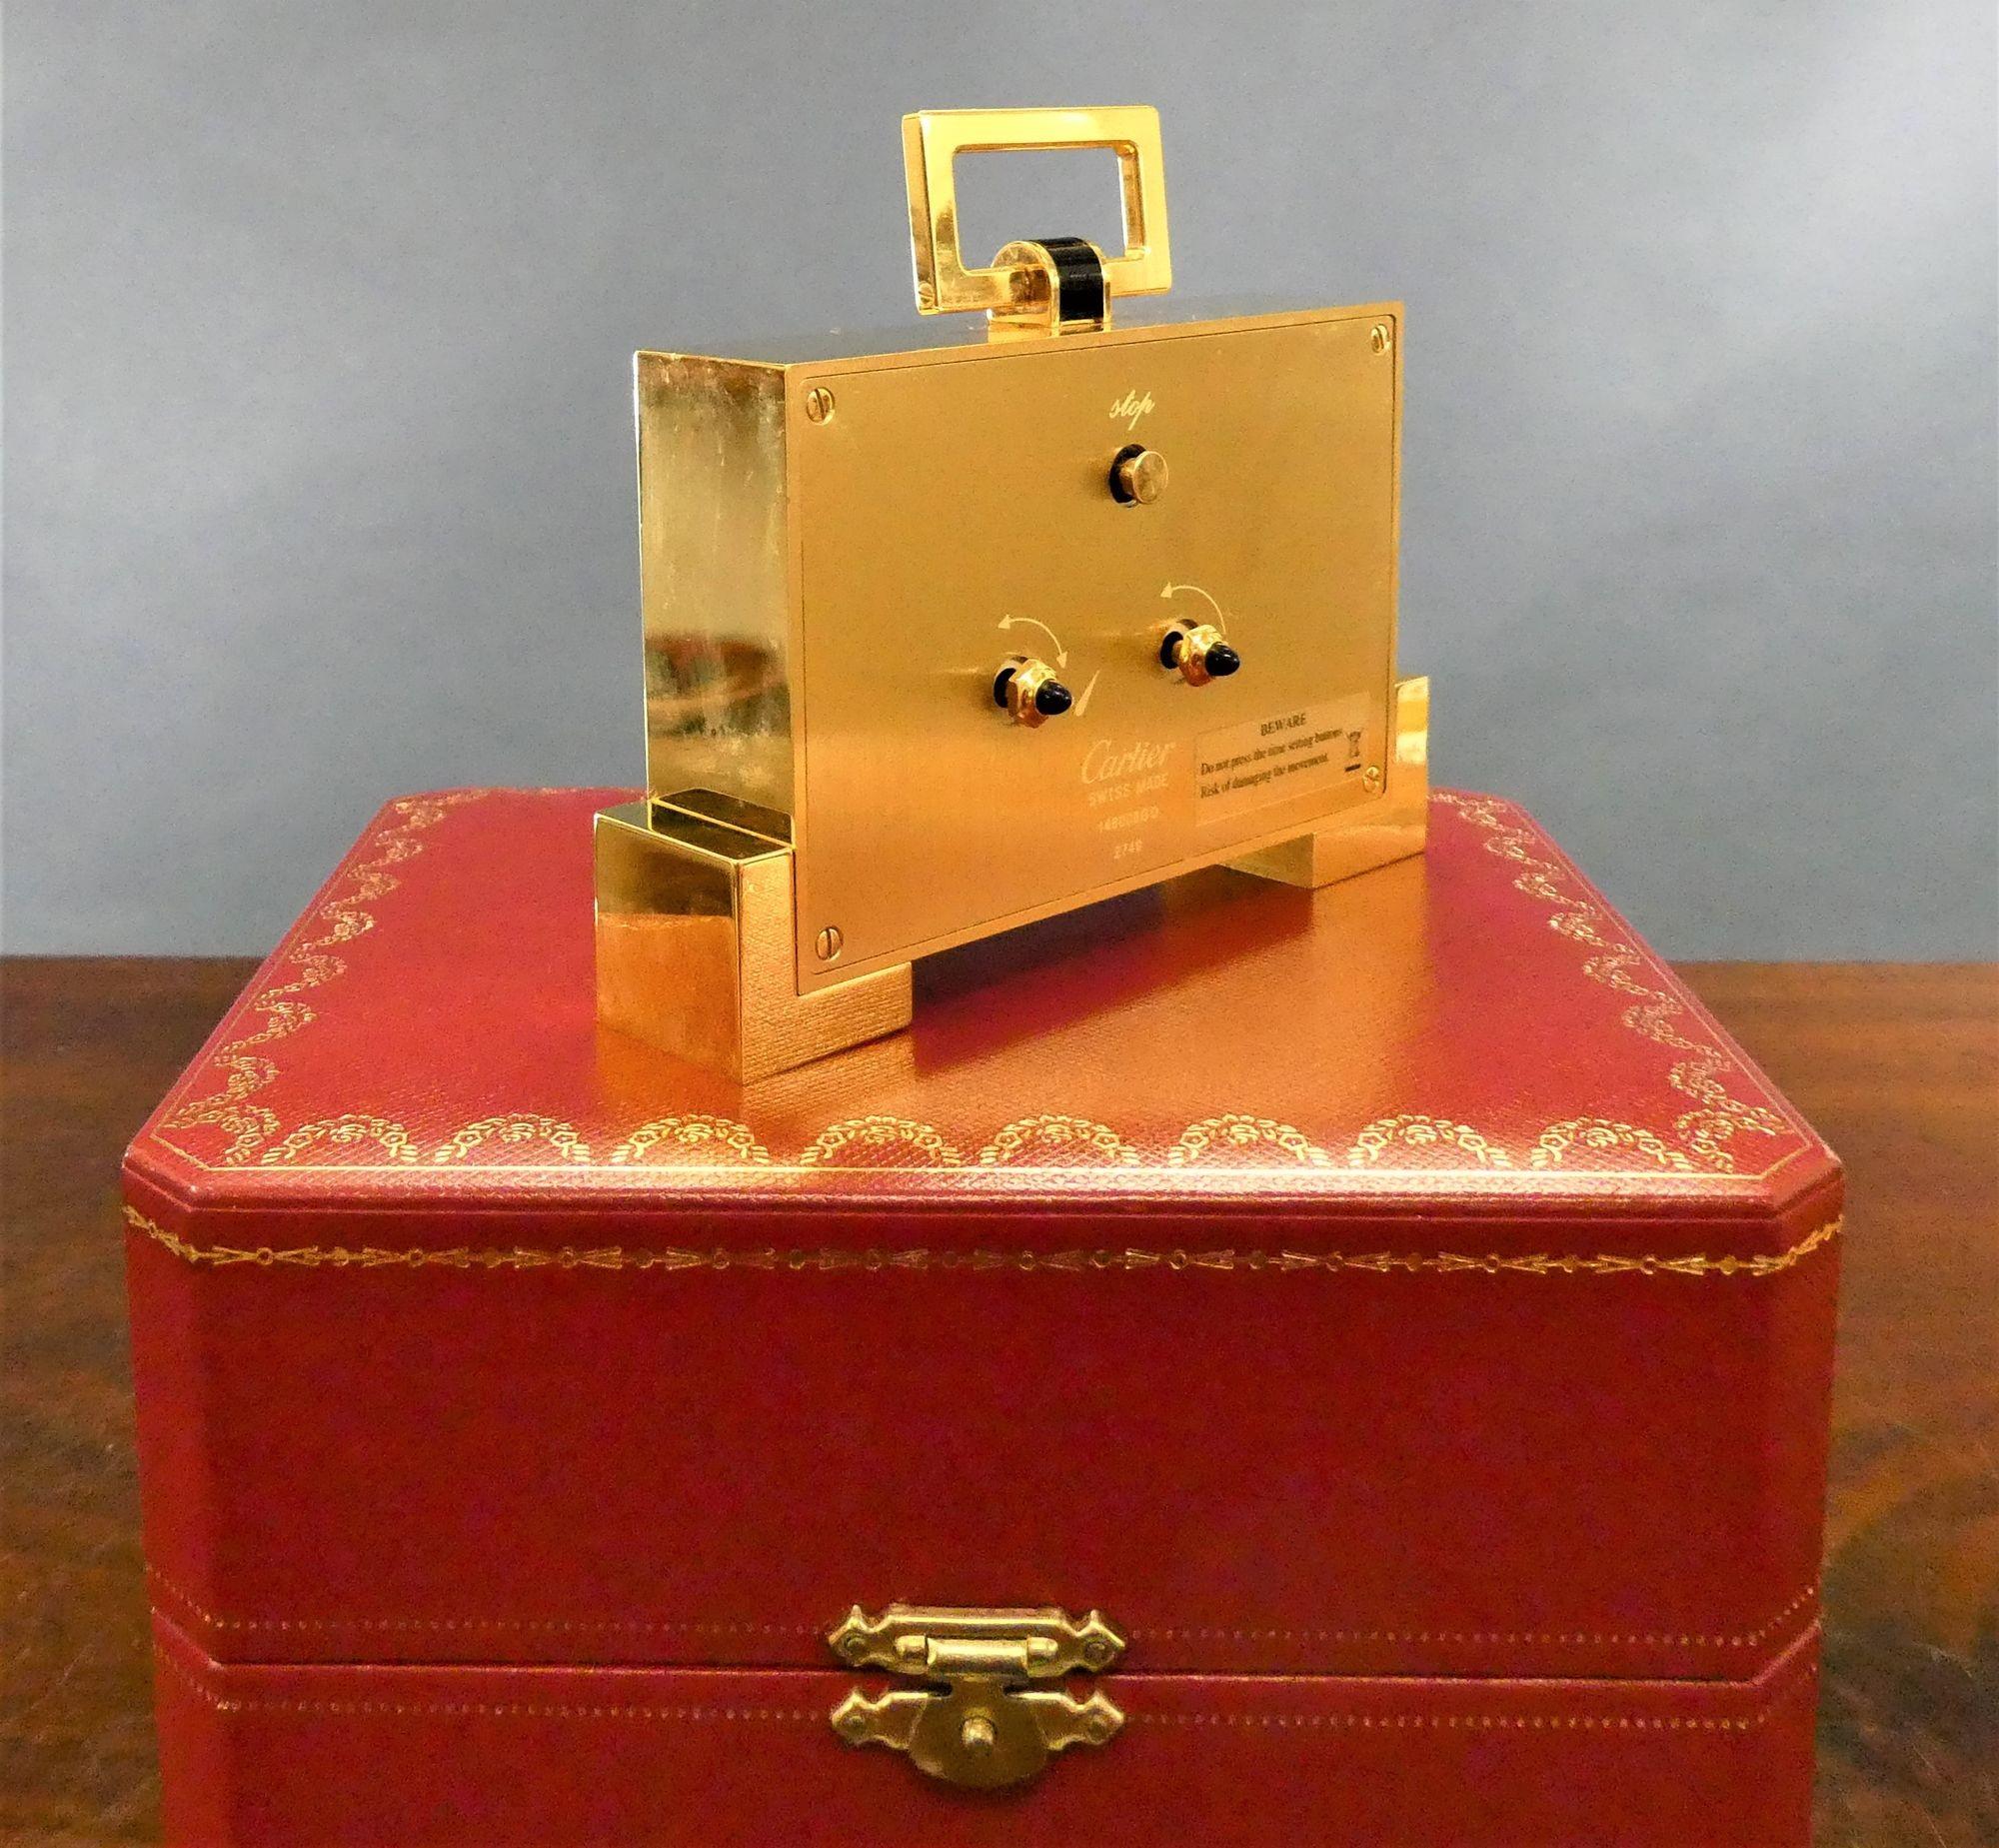 Cartier 'Leopard Print' Travel Alarm Clock In Good Condition For Sale In Norwich, GB